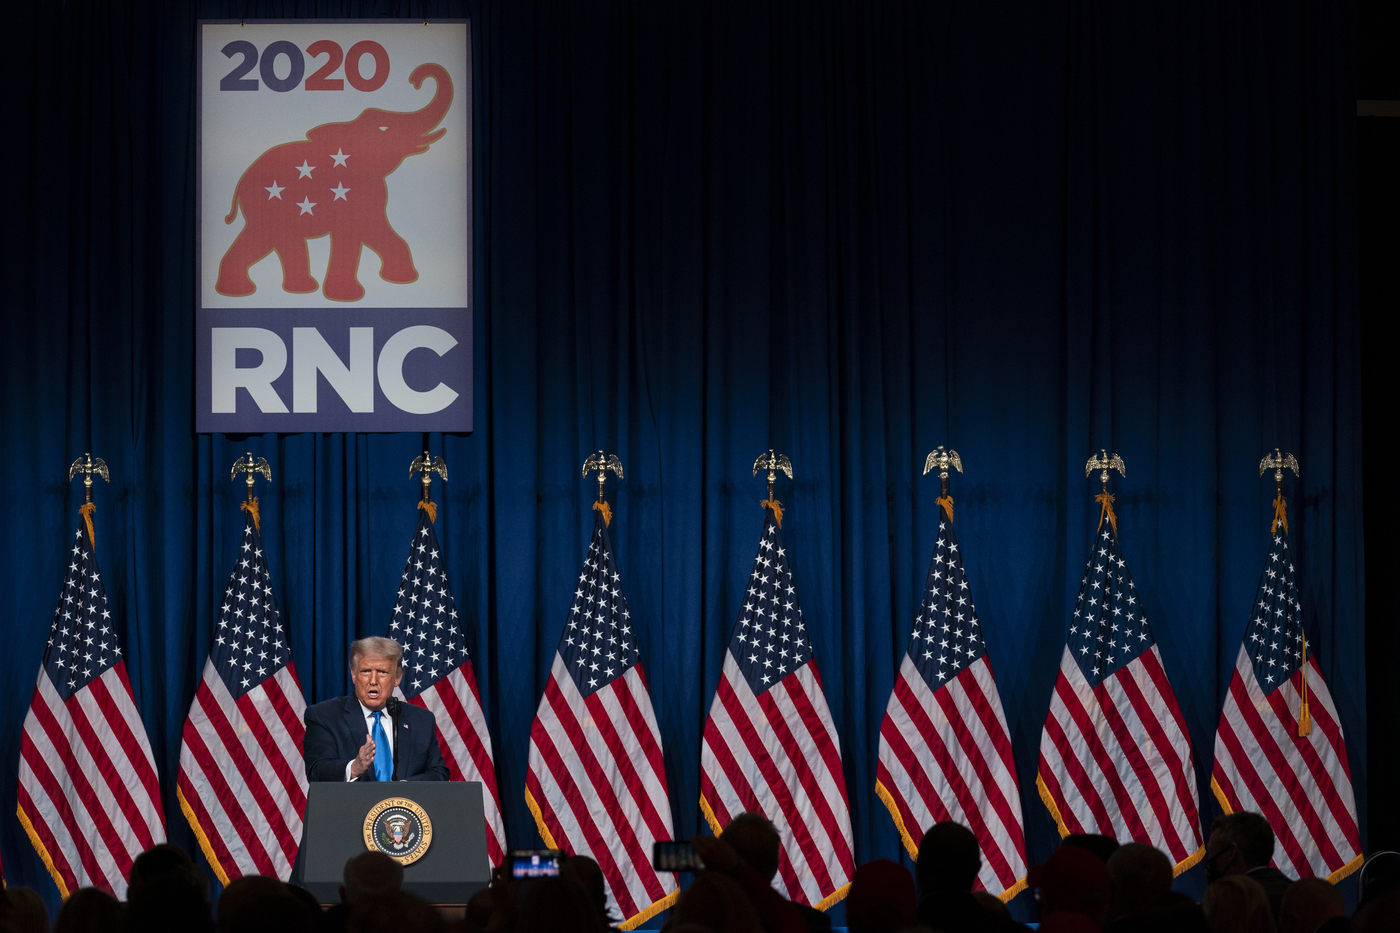 President Donald Trump speaks at Republican National Committee convention, Monday, Aug. 24, 2020, in Charlotte. (AP Photo/Evan Vucci)